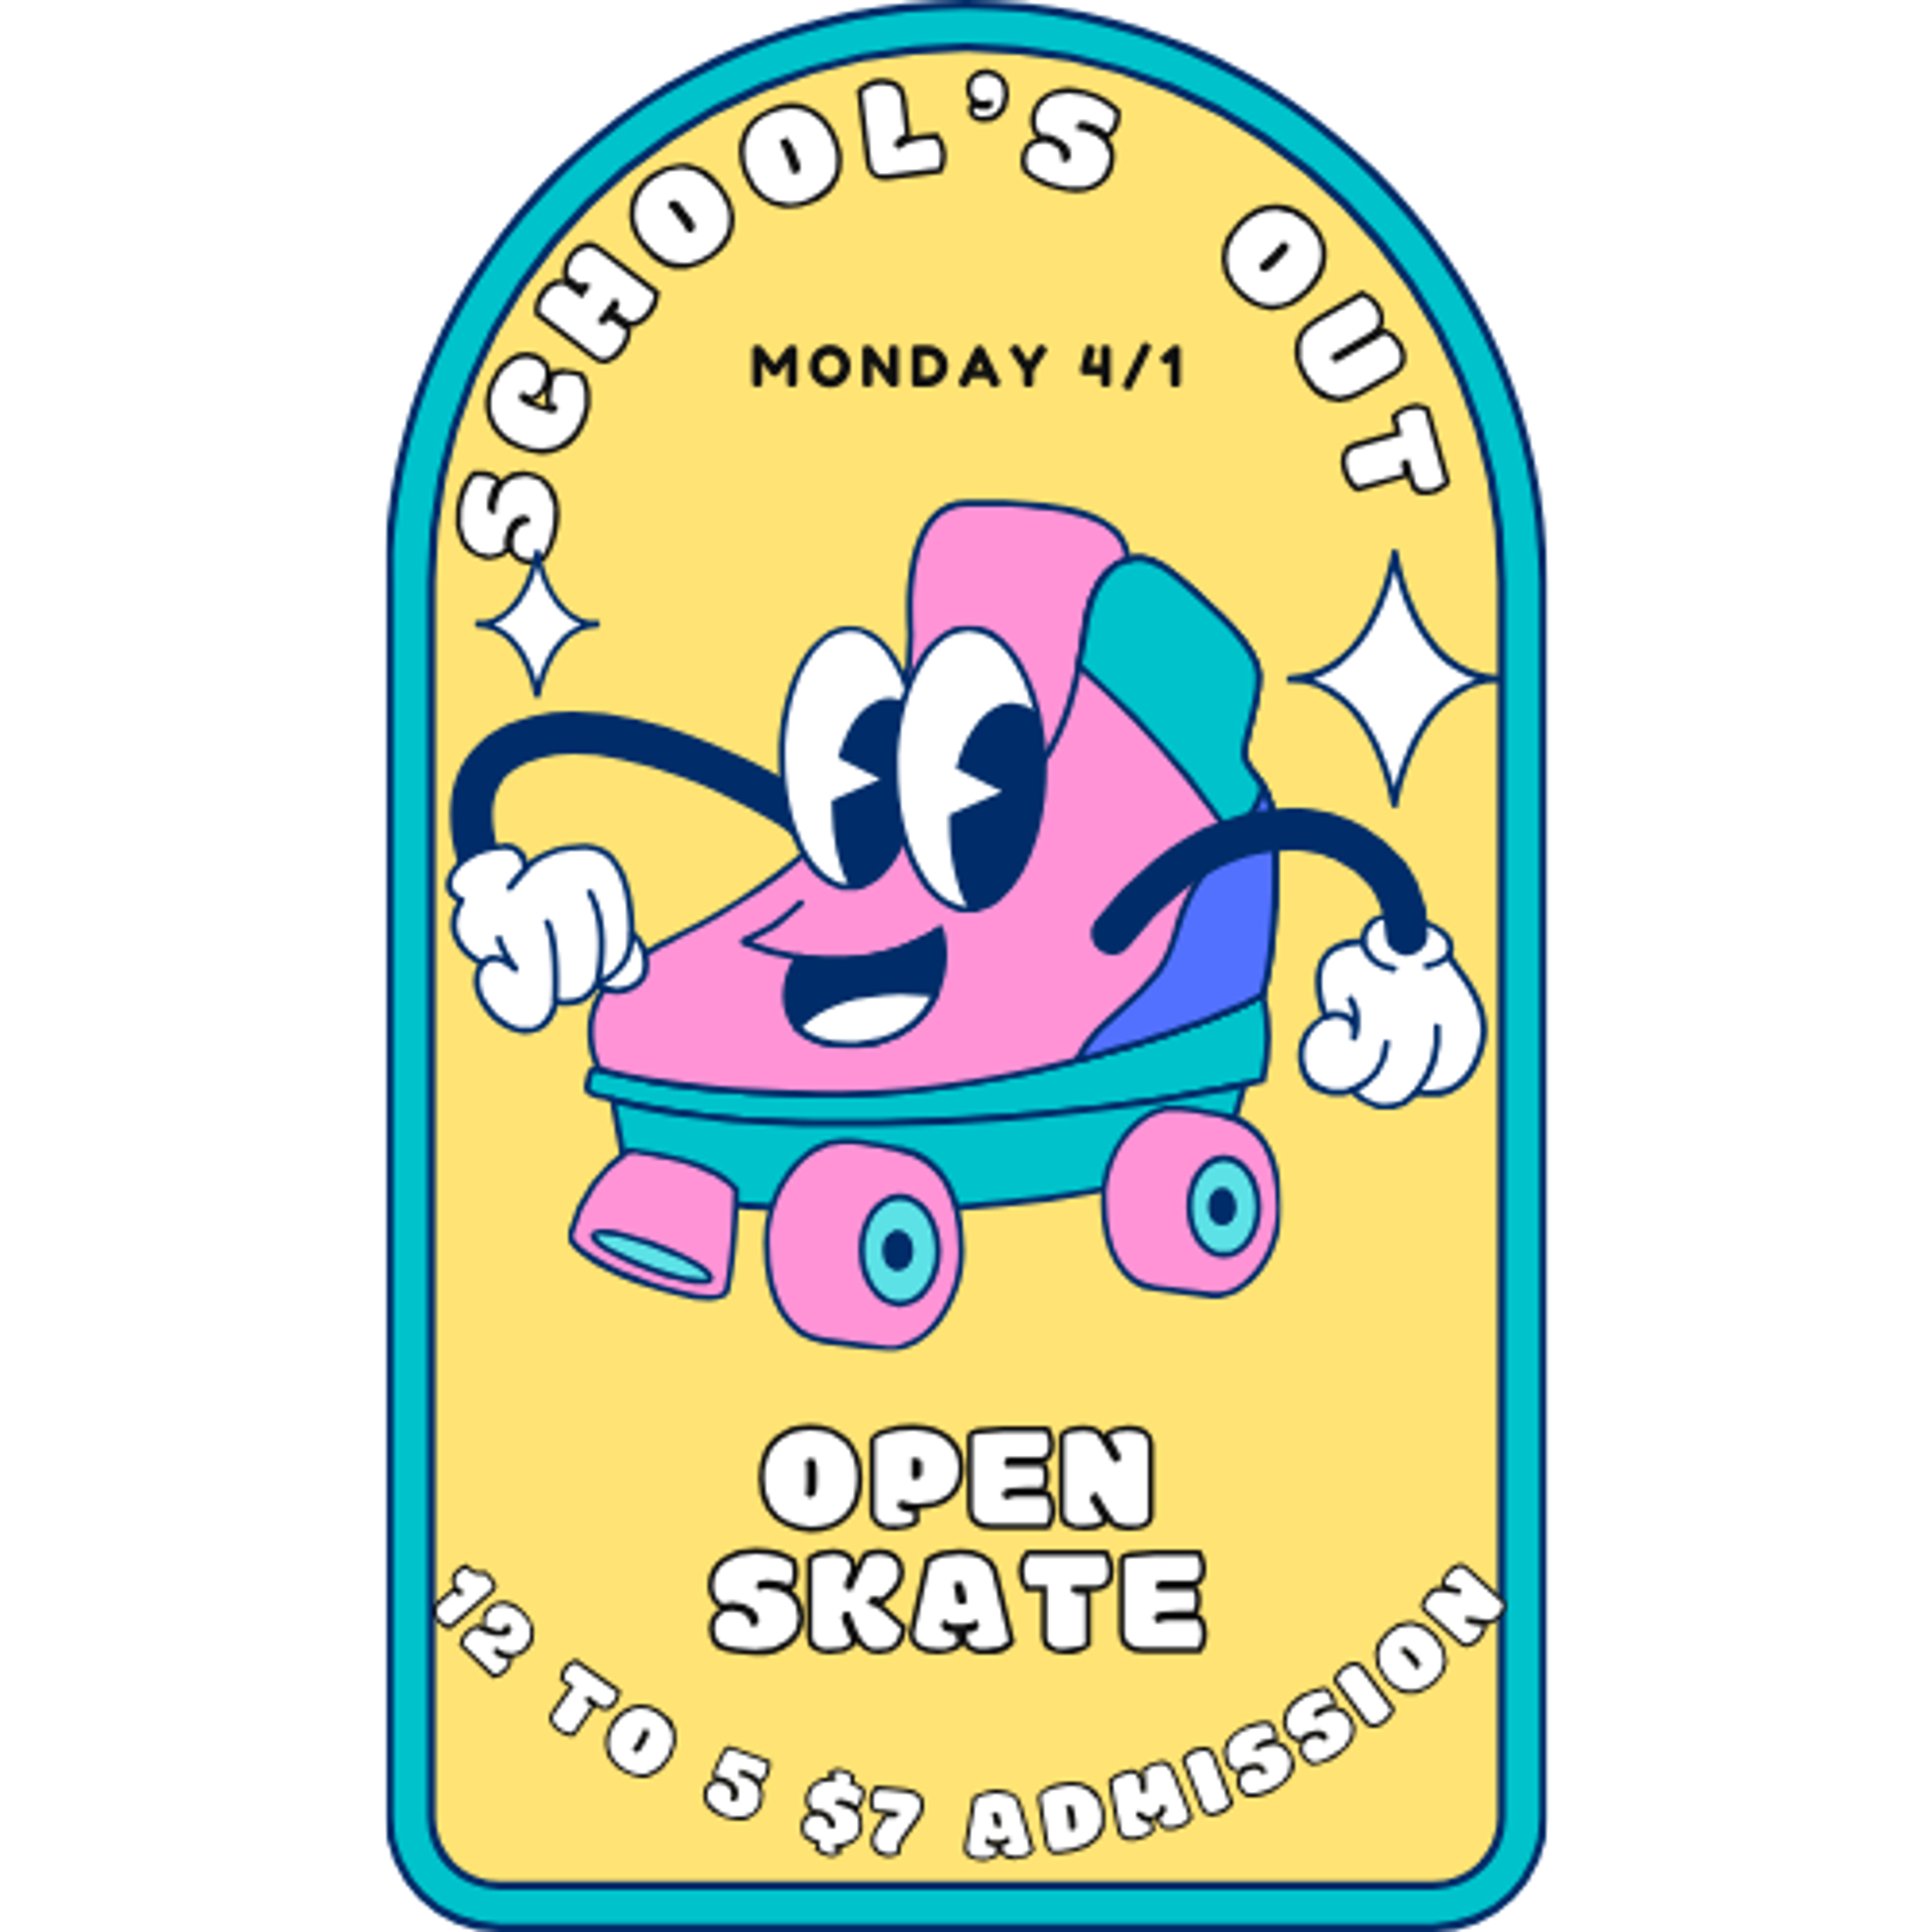 School's Out Open Skate